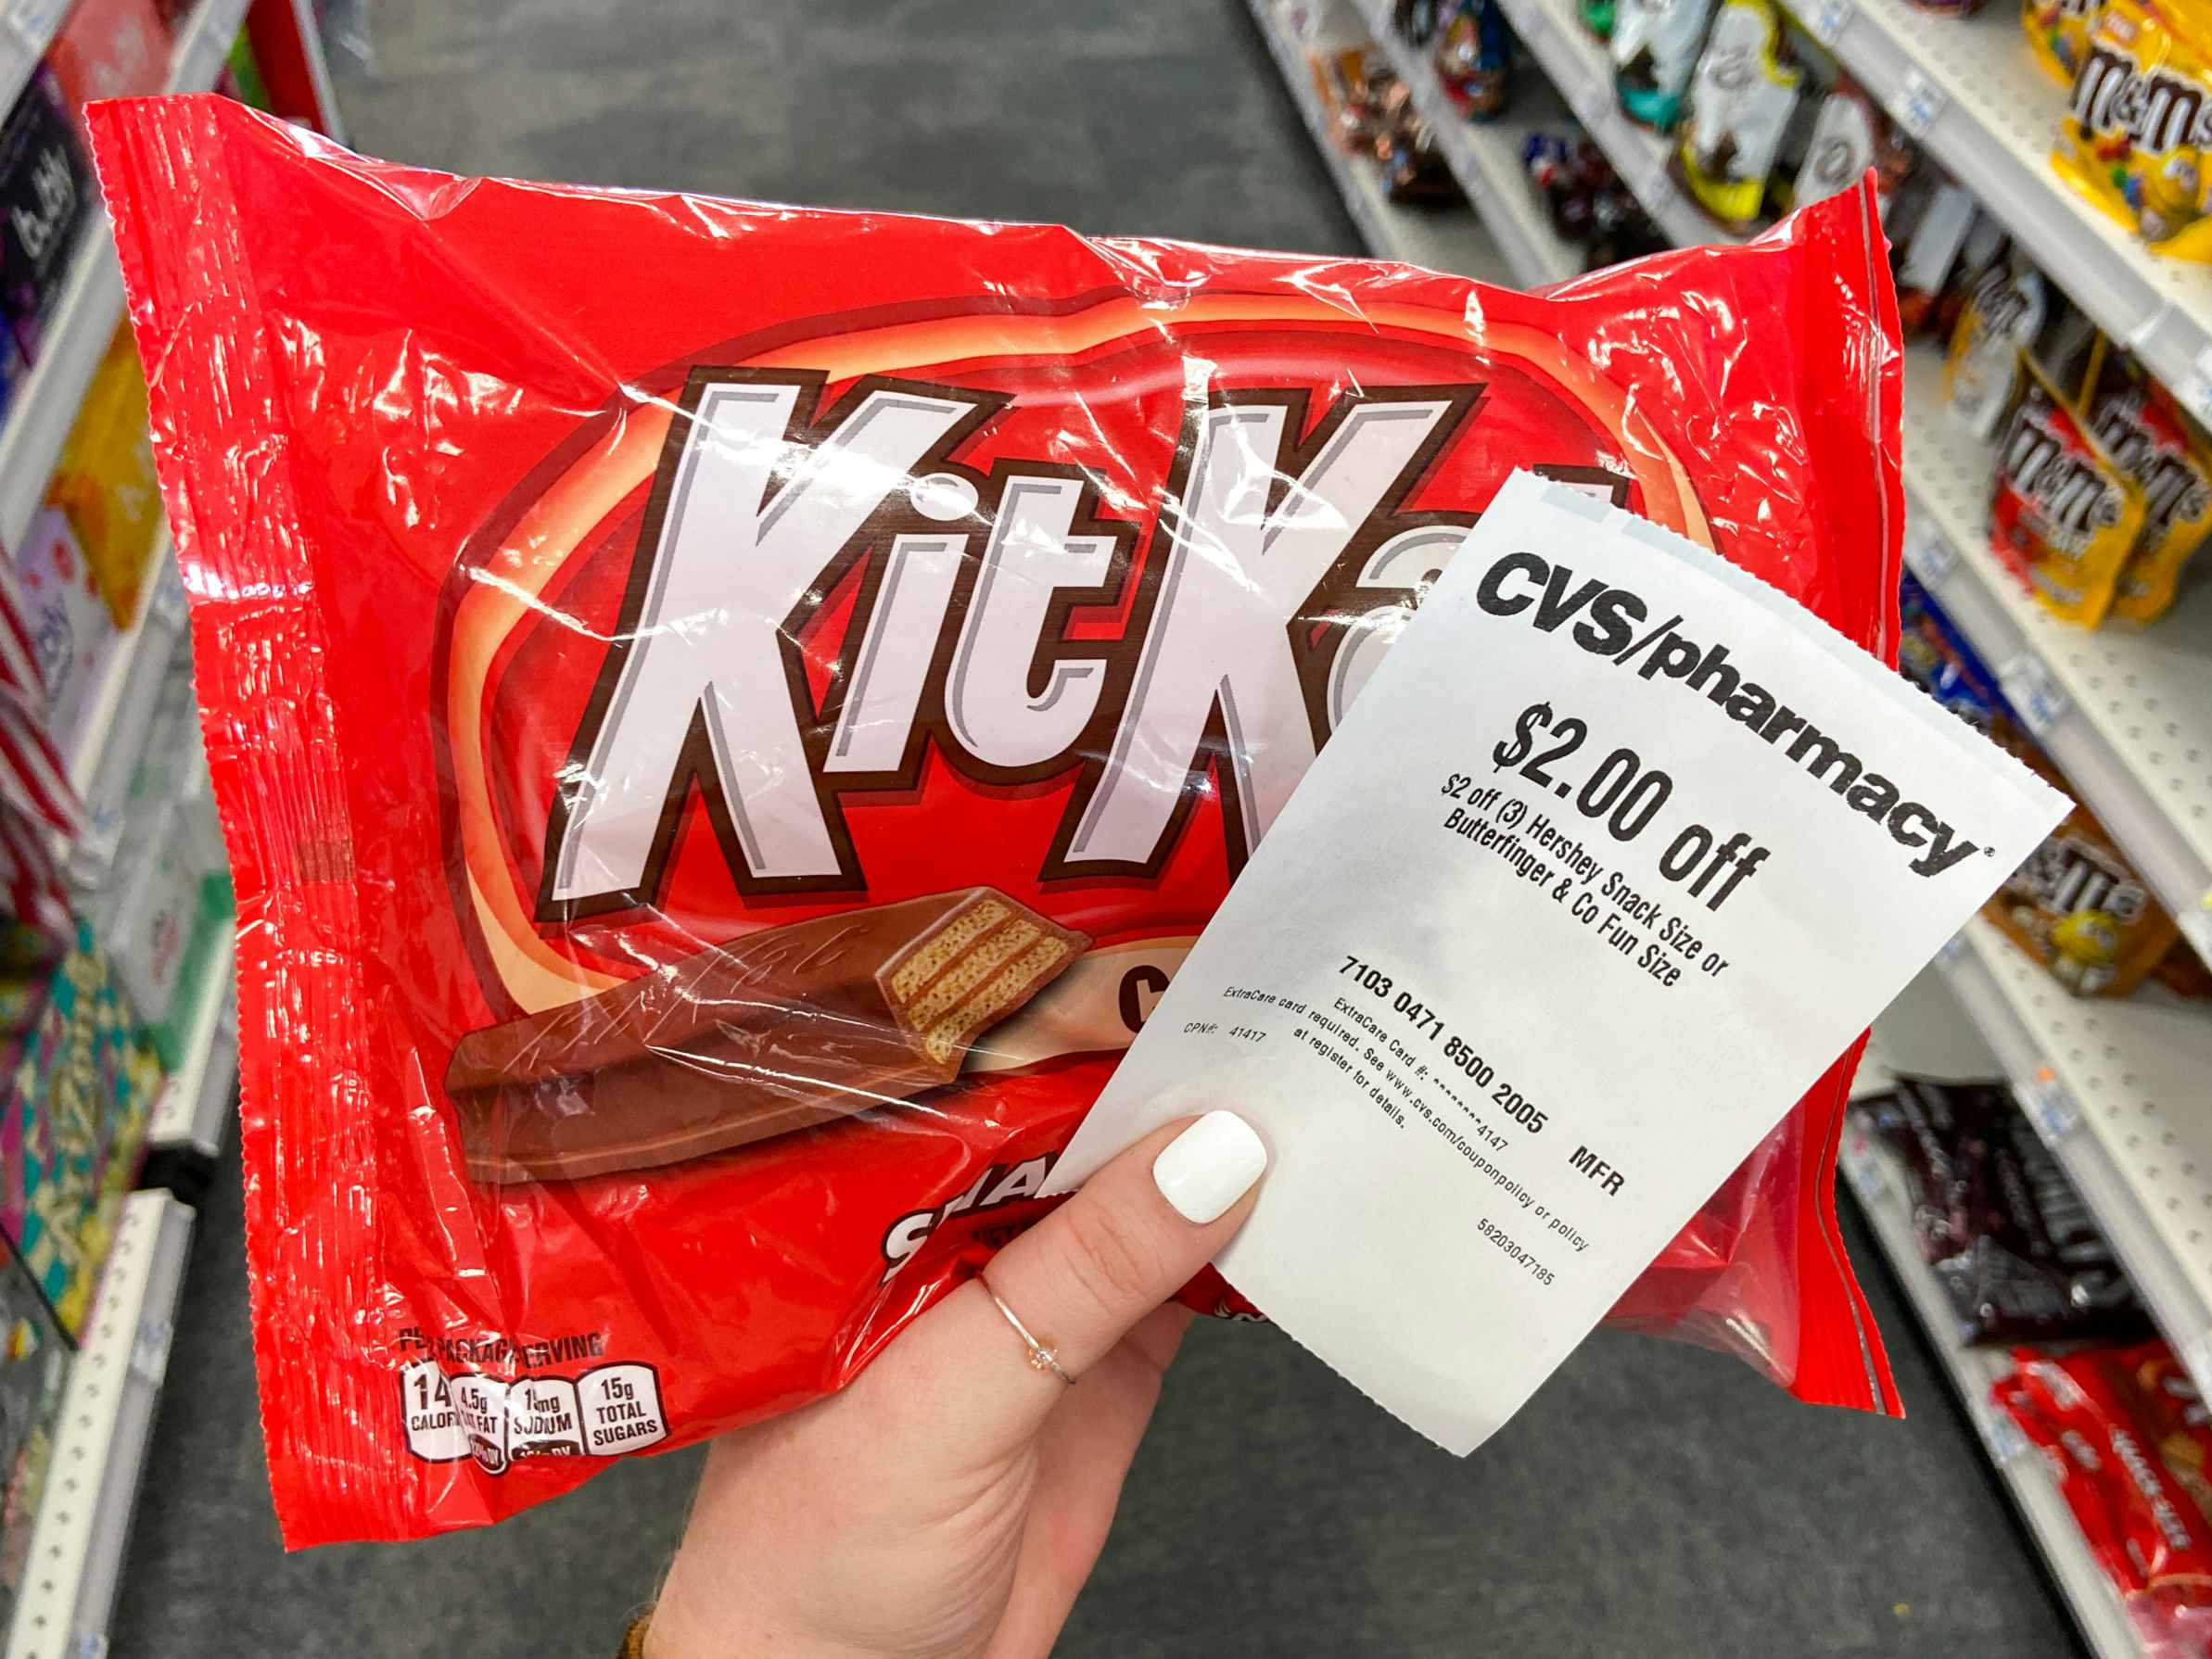 a hand holding up a bag of kit kats with a coupon